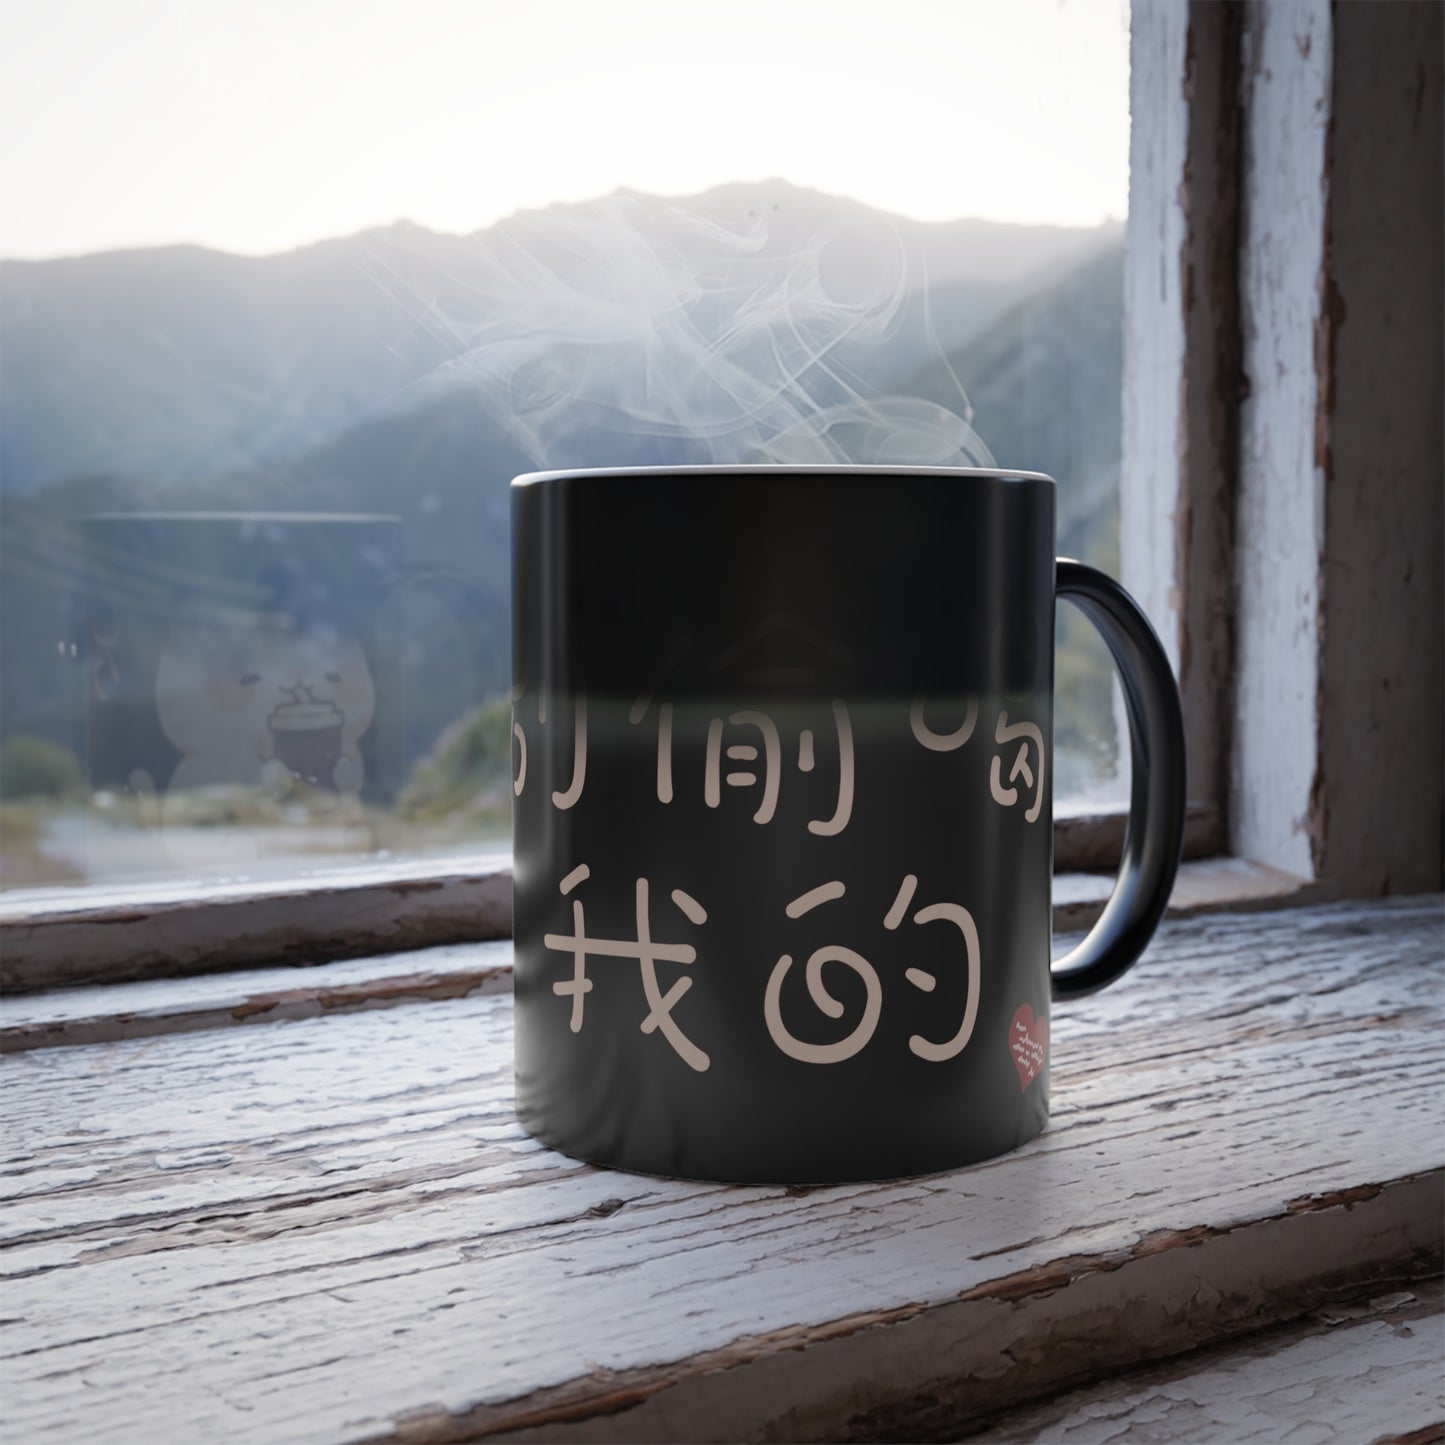 Don't Drink My Drink! 11oz Color Heat Changing Mug Chinese Characters